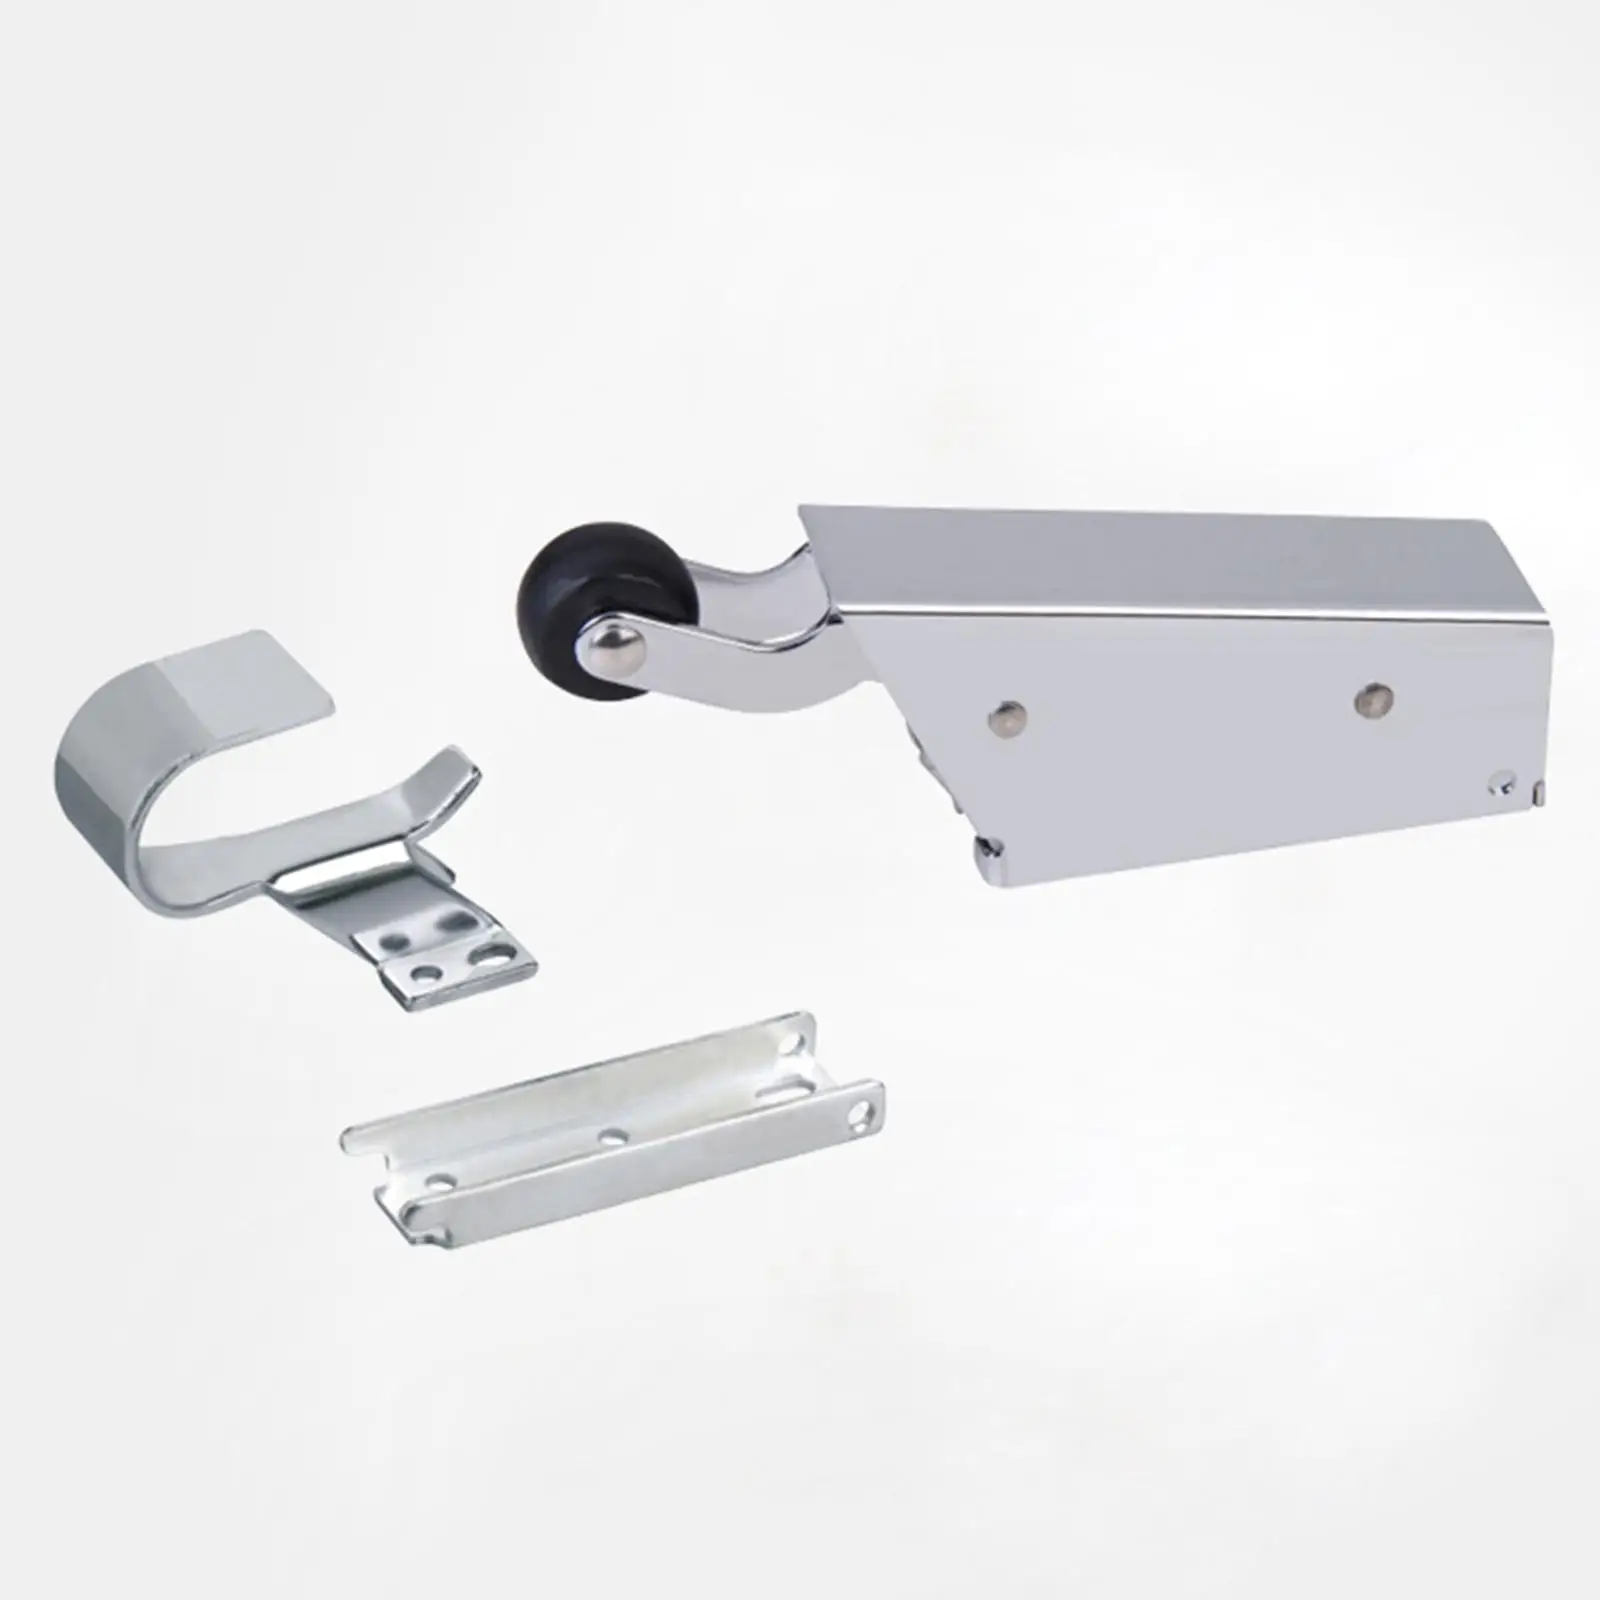 Spring Action Doors Closer Refrigeration Door Closers Automatic School Concealed Mounting Office with Quiet Rubber Wheel